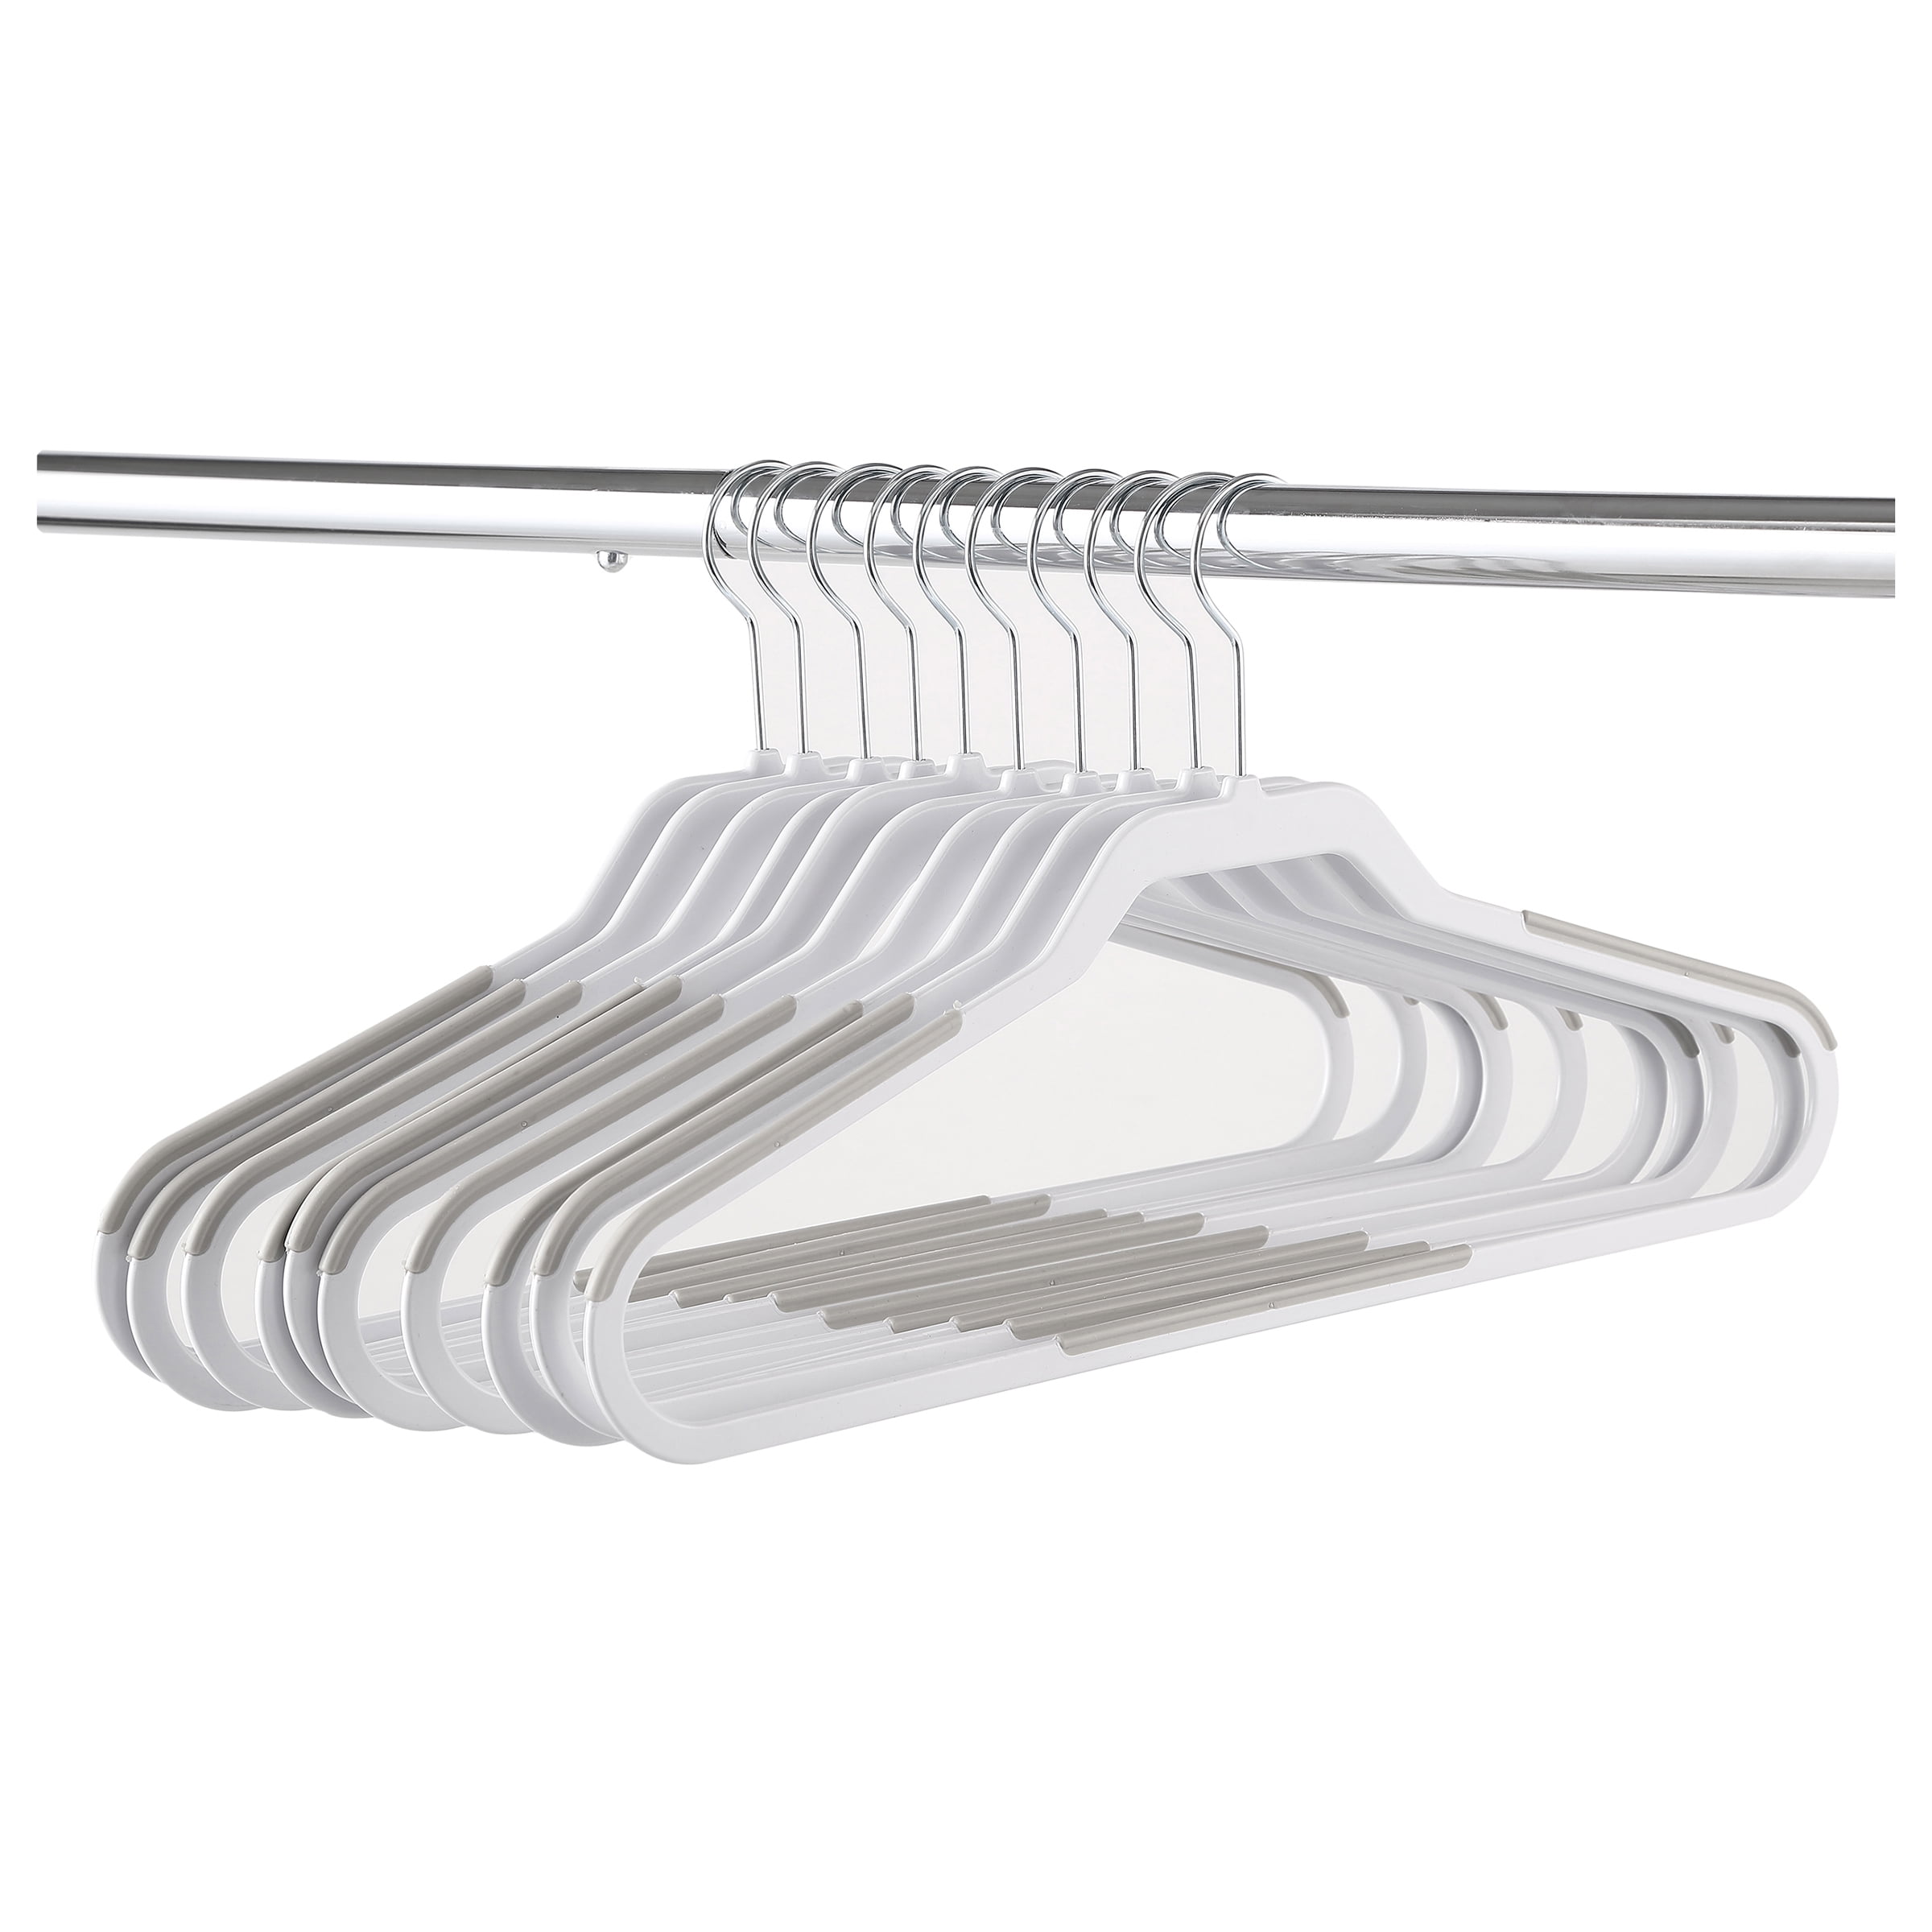 White Standard Plastic Hangers Made in The USA Notched Notched White, 60 Pack Set of 60 Durable and Slim